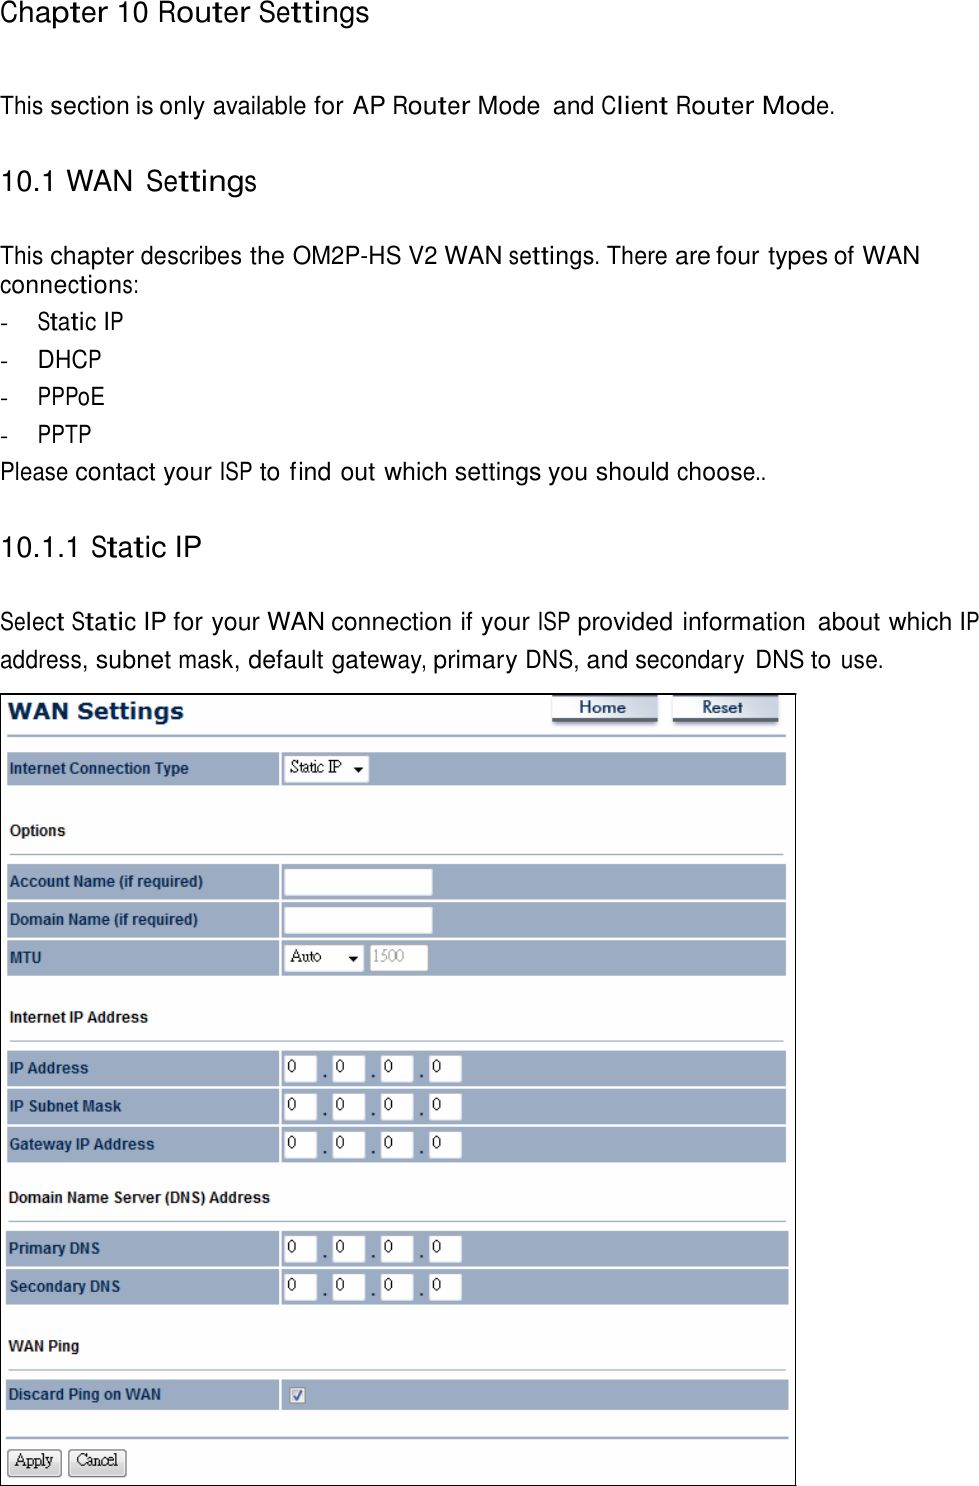   Chapter 10 Router Settings    This section is only available for AP Router Mode  and Client Router Mode.   10.1 WAN Settings   This chapter describes the OM2P-HS V2 WAN settings. There are four types of WAN connections: - Static IP - DHCP - PPPoE - PPTP Please contact your ISP to find out which settings you should choose..   10.1.1 Static IP   Select Static IP for your WAN connection if your ISP provided information  about which IP address, subnet mask, default gateway, primary DNS, and secondary  DNS to use. 